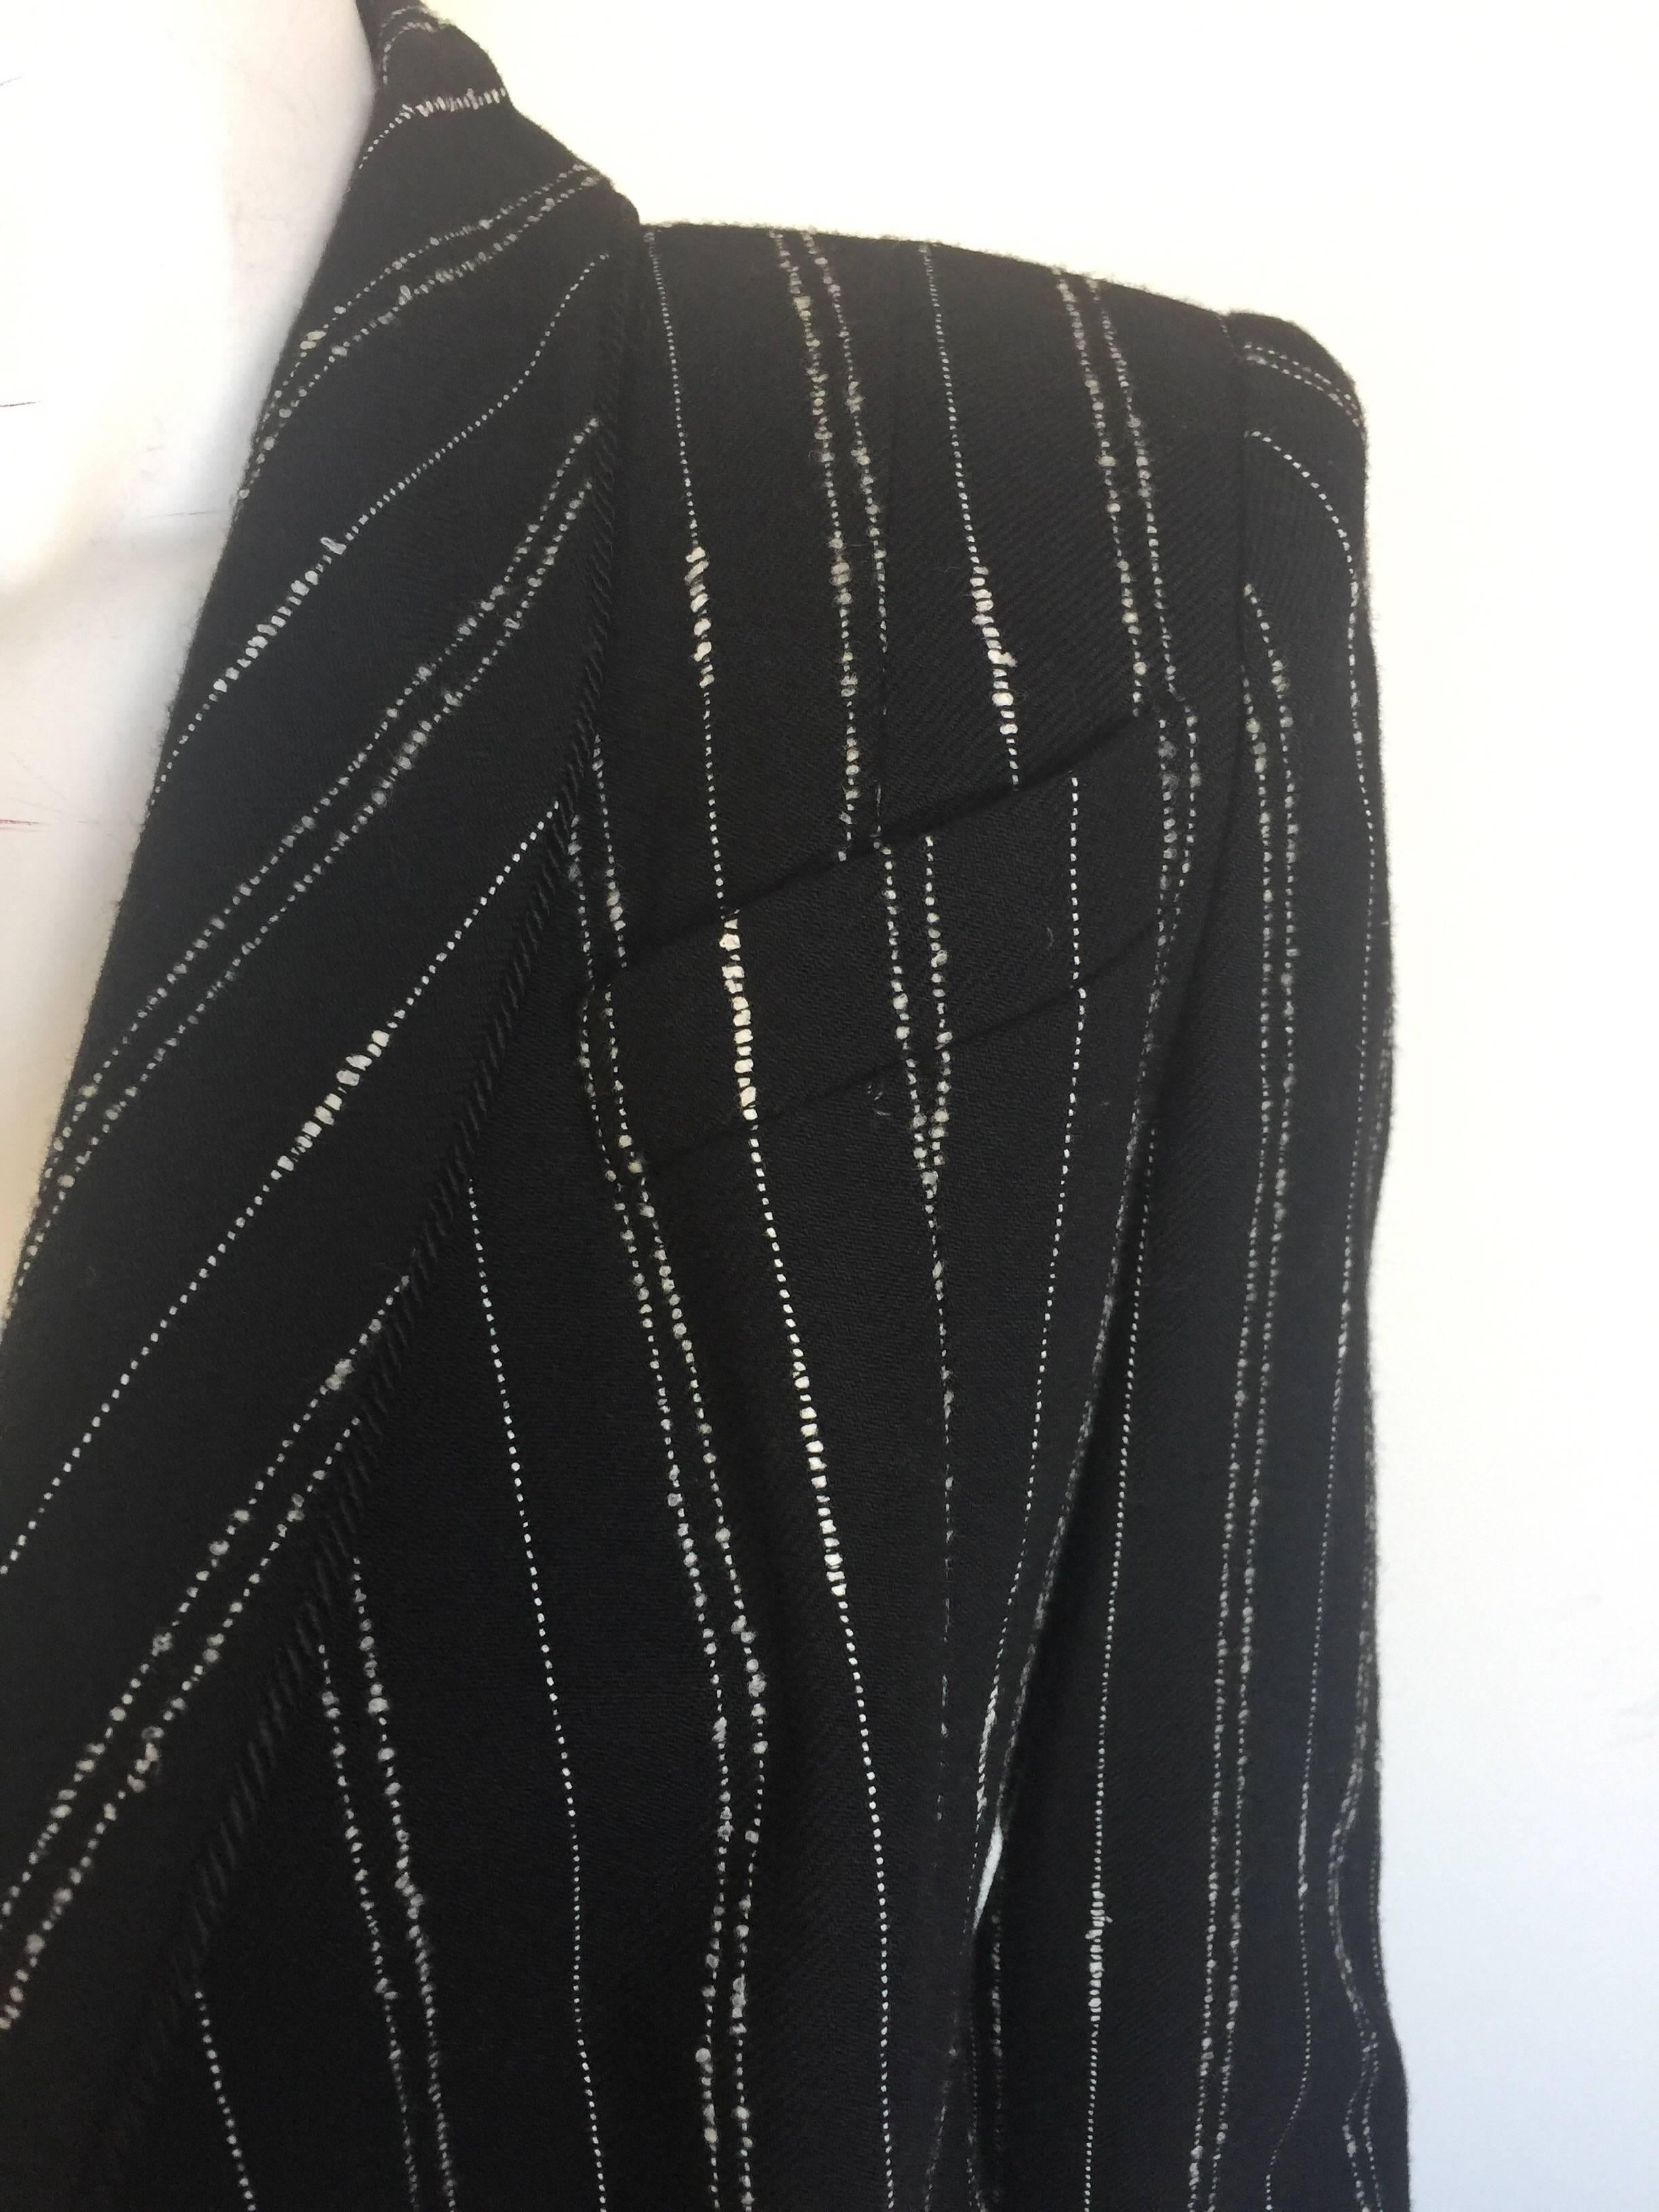 Givenchy black and white pinstripe skirt suit For Sale 1